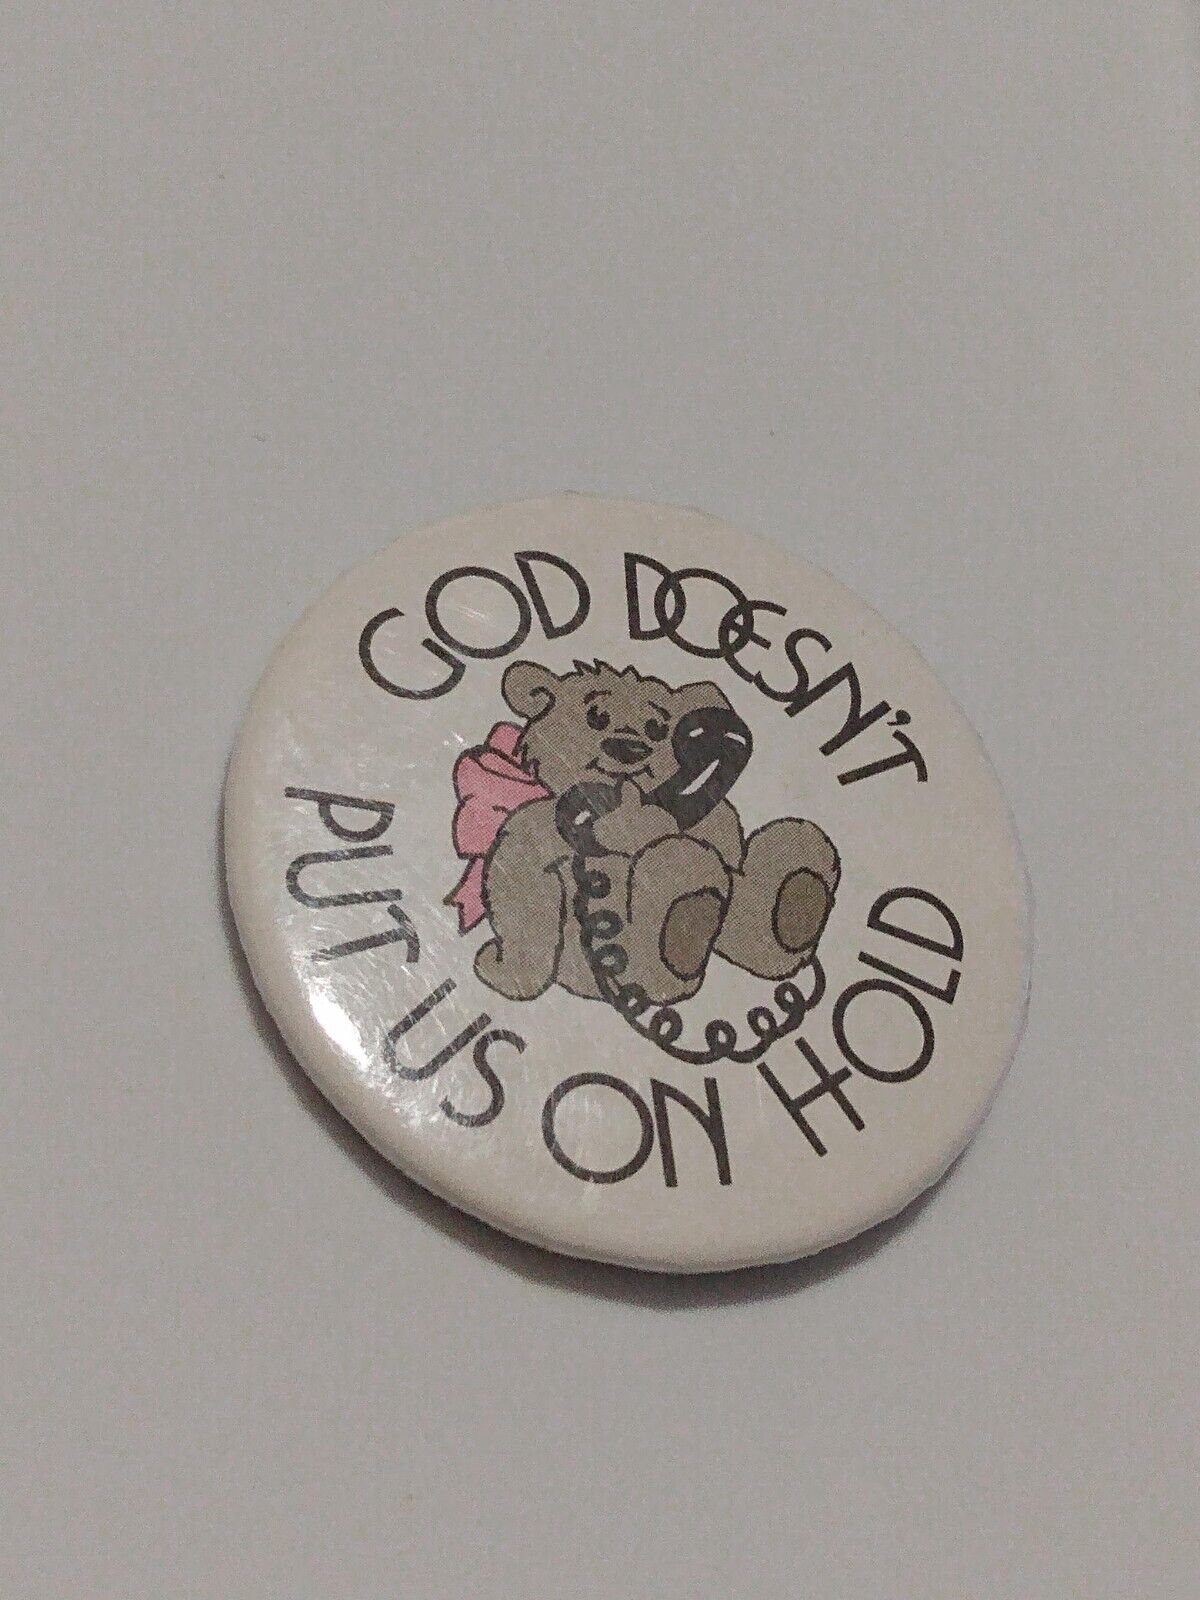 God Doesn't Put Us On Hold Large Badge Button Lapel Pin